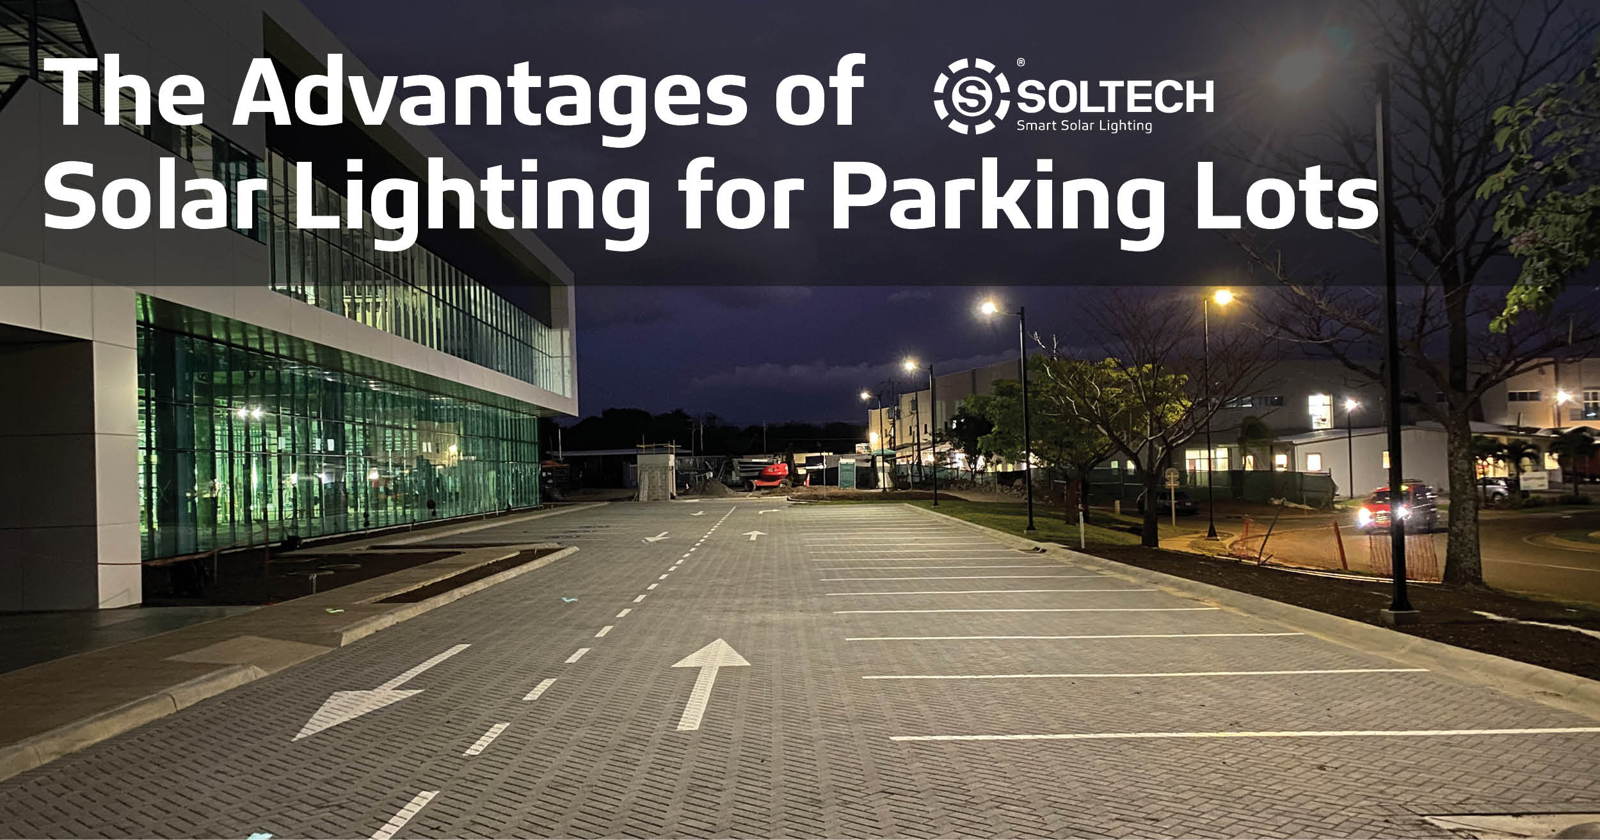 The blog tile for "The Advantages of Solar Lighting for Parking Lots." It shows a parking lot lit by solar area lights.